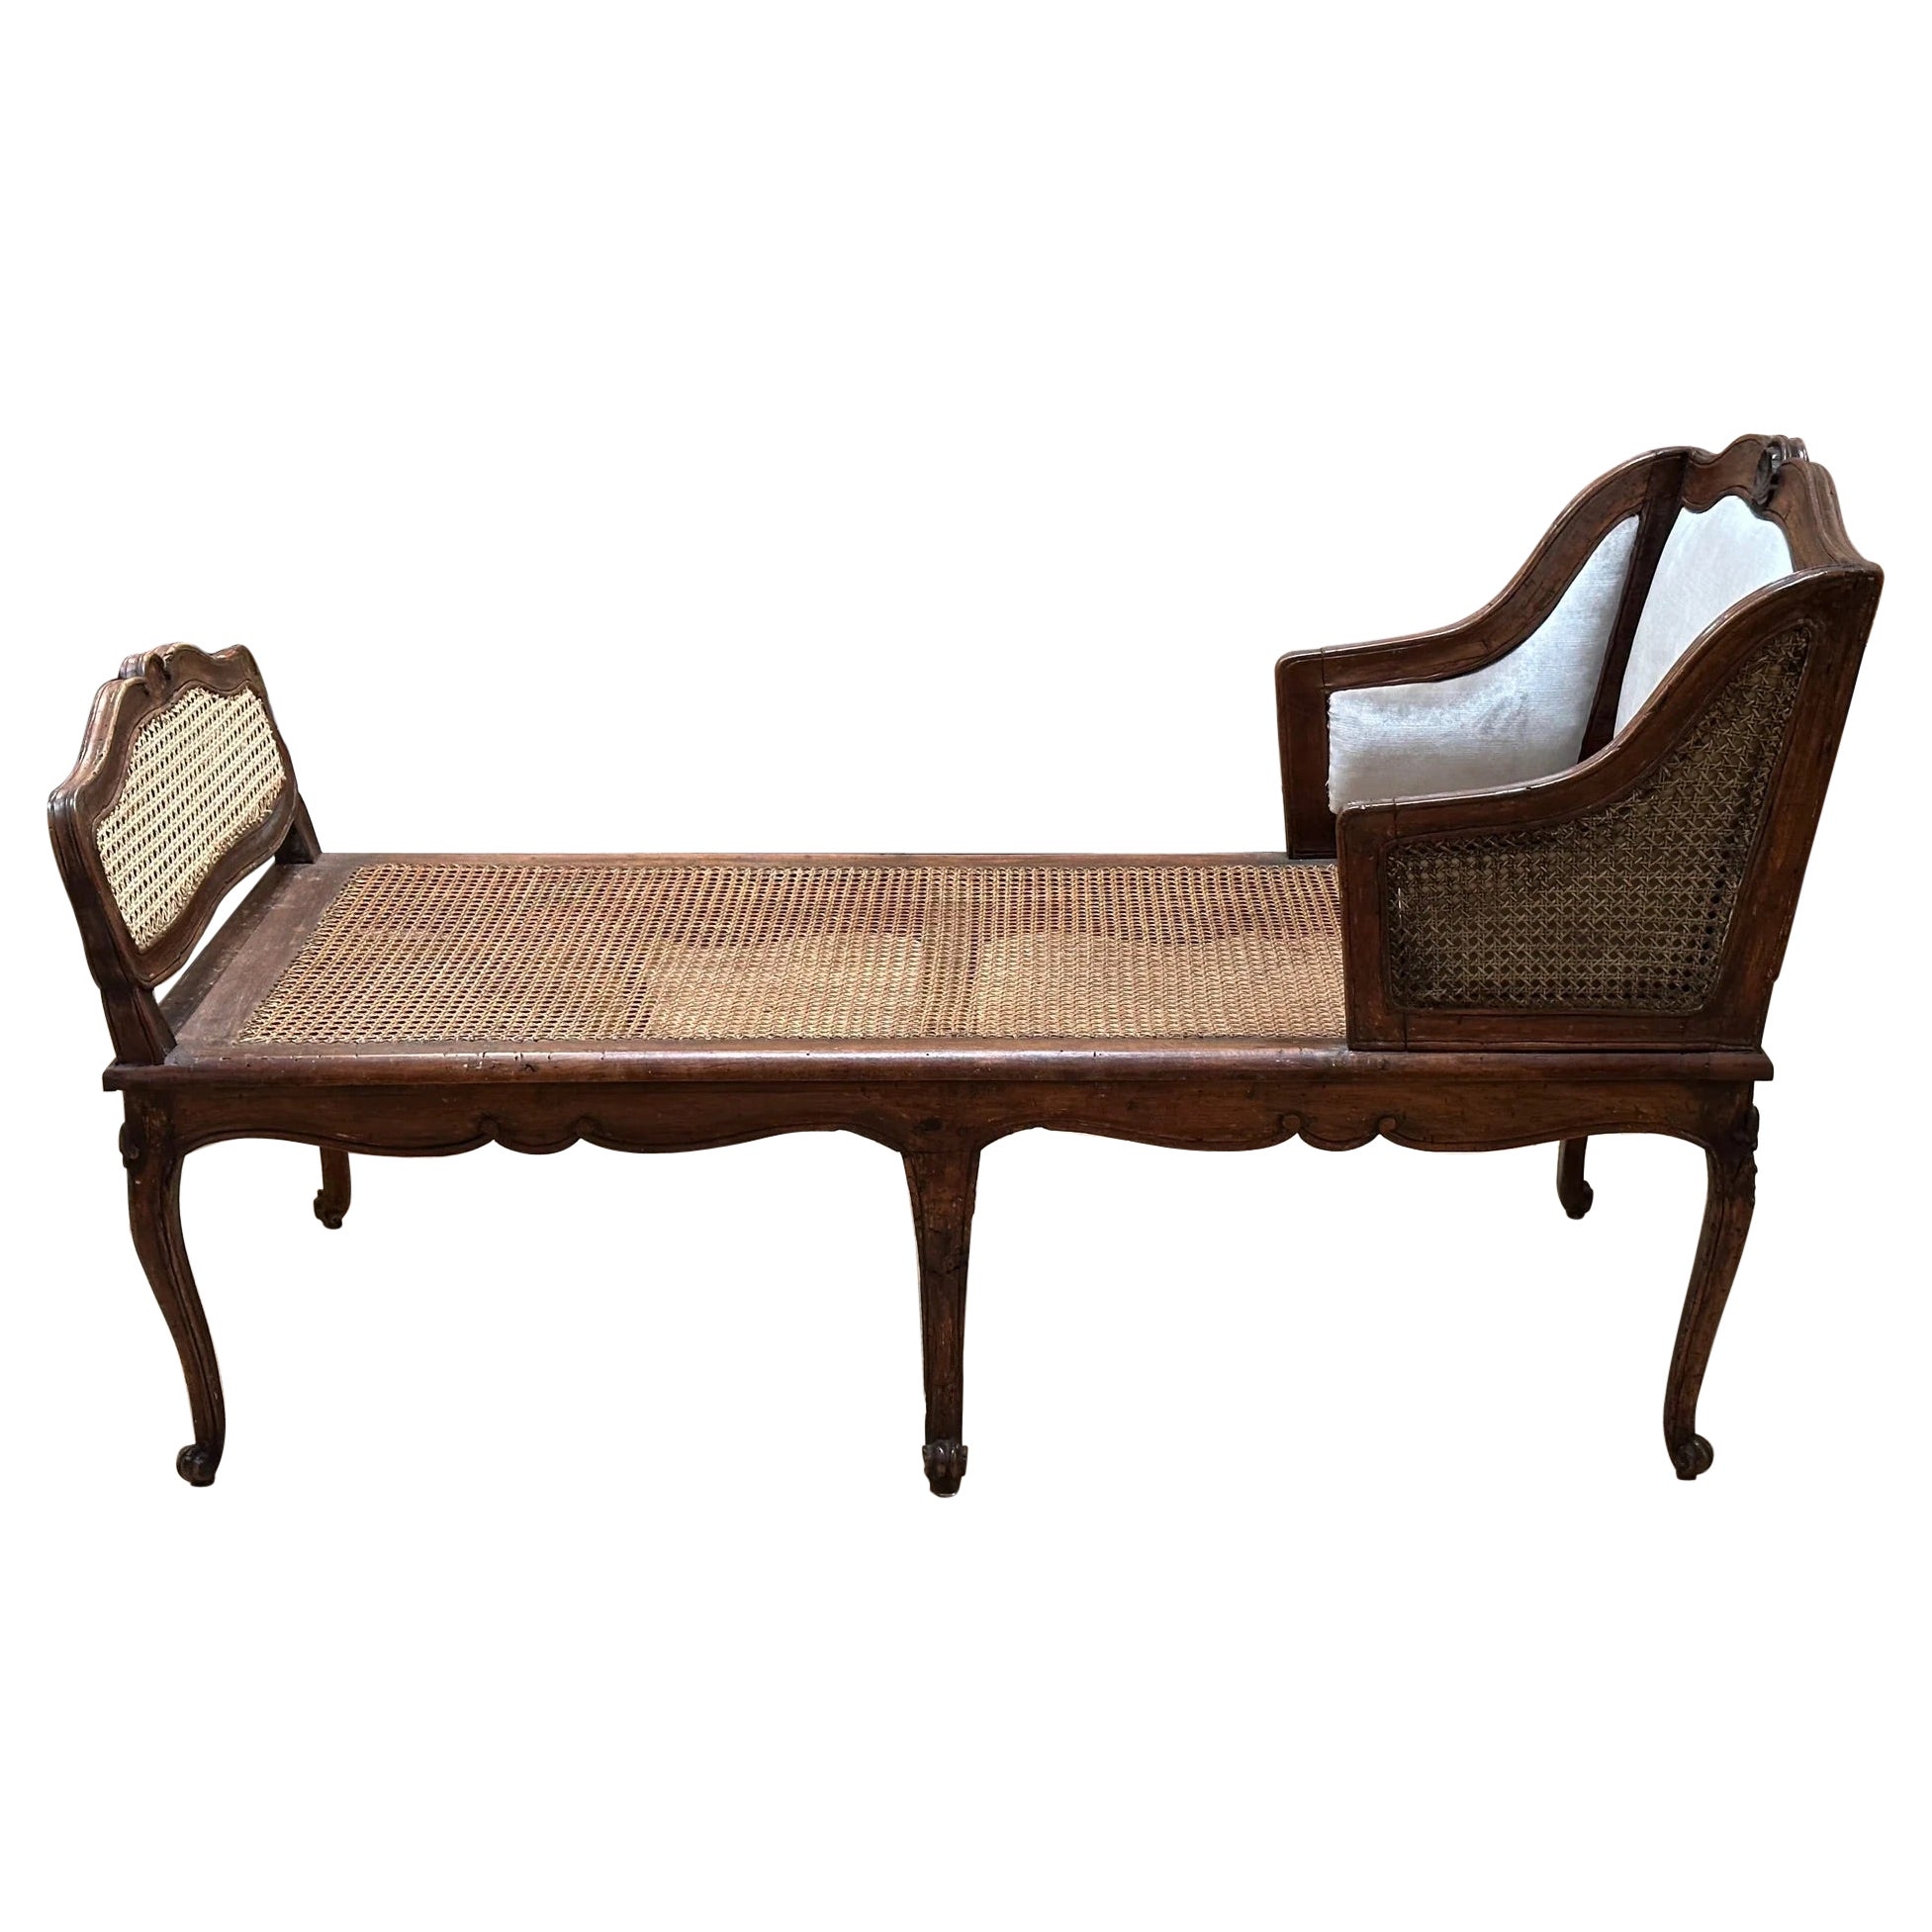 18th century Italian Lit de Repos in Walnut and Cane For Sale